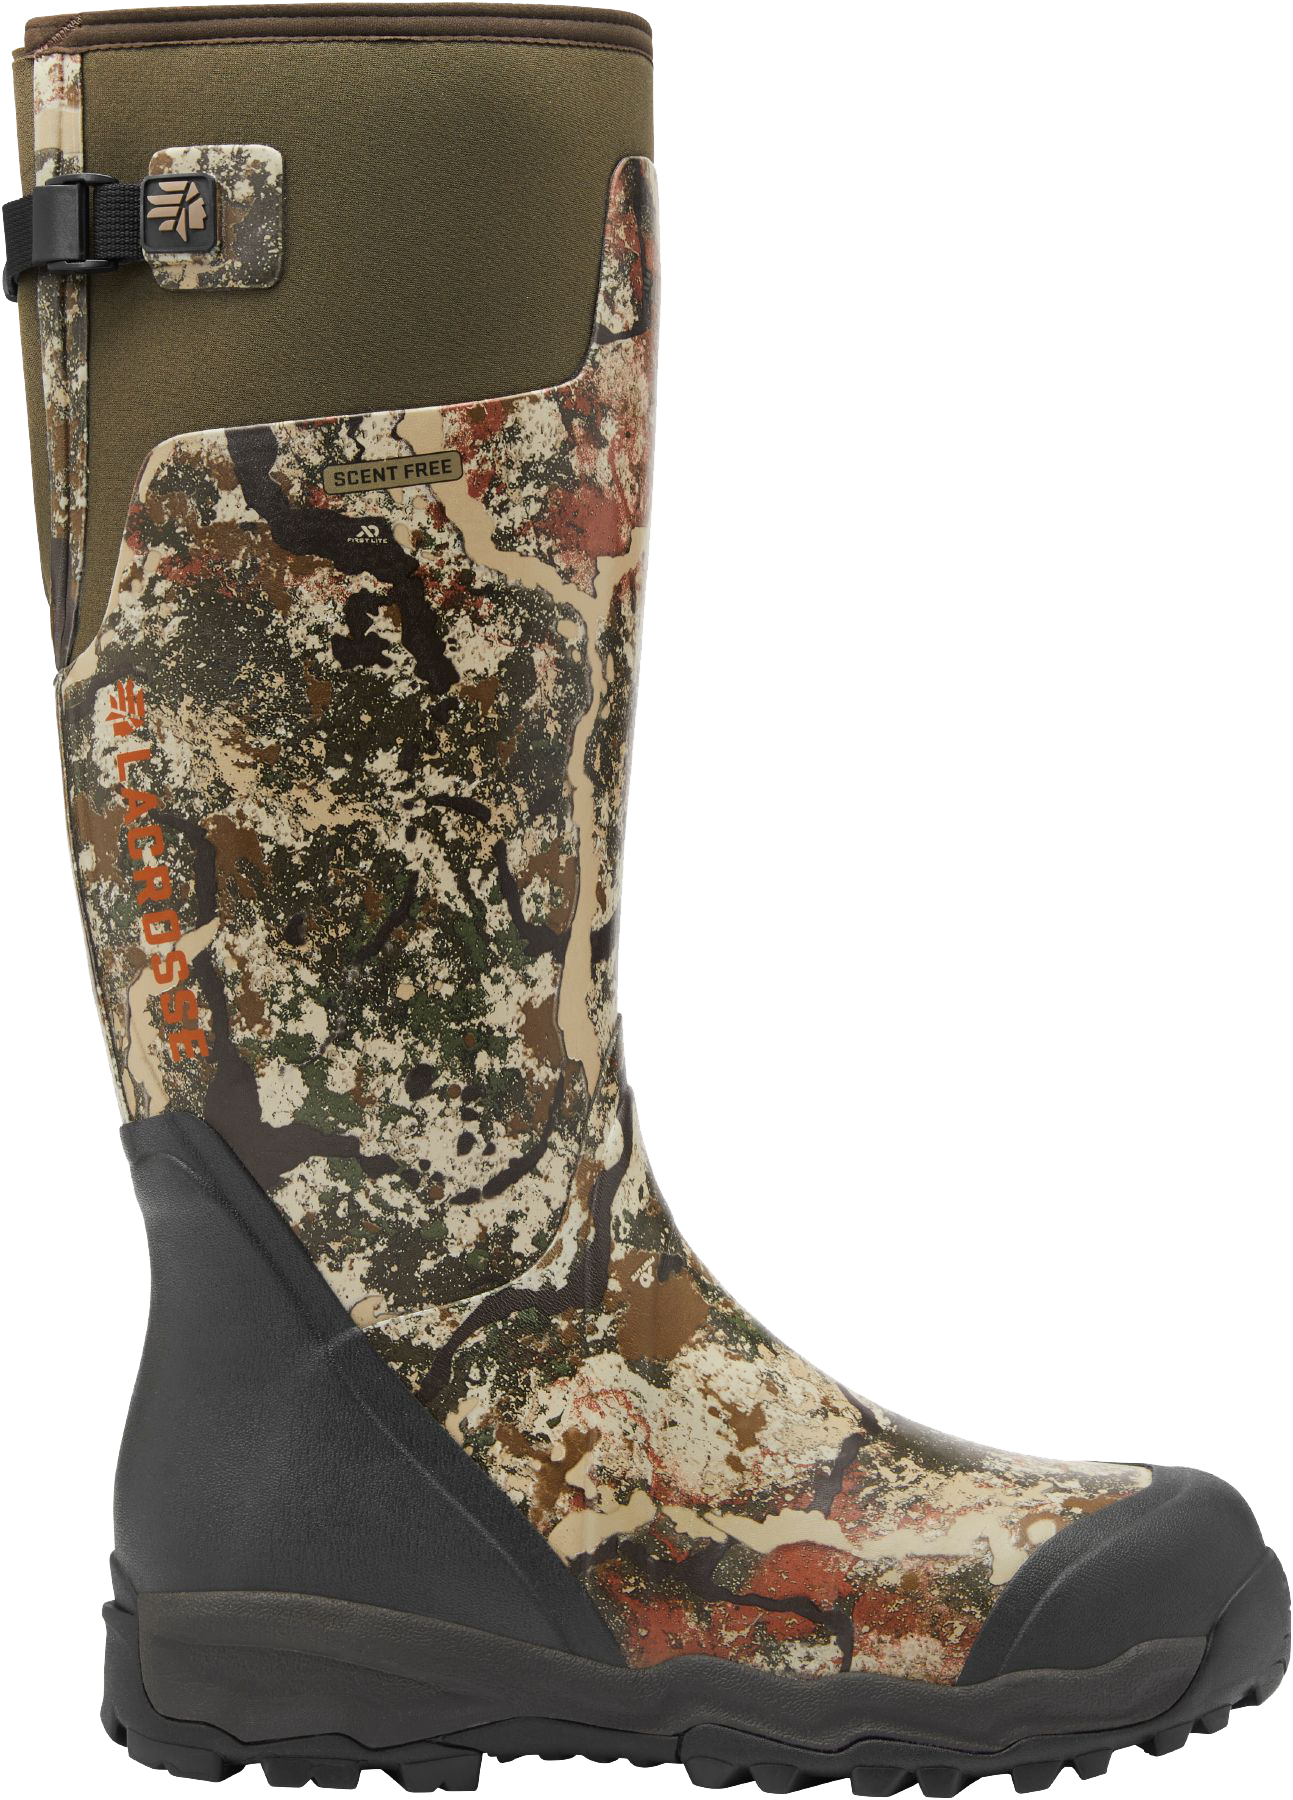 LaCrosse AlphaBurly Pro Hunting Boots for Men - First Lite Specter - 15M